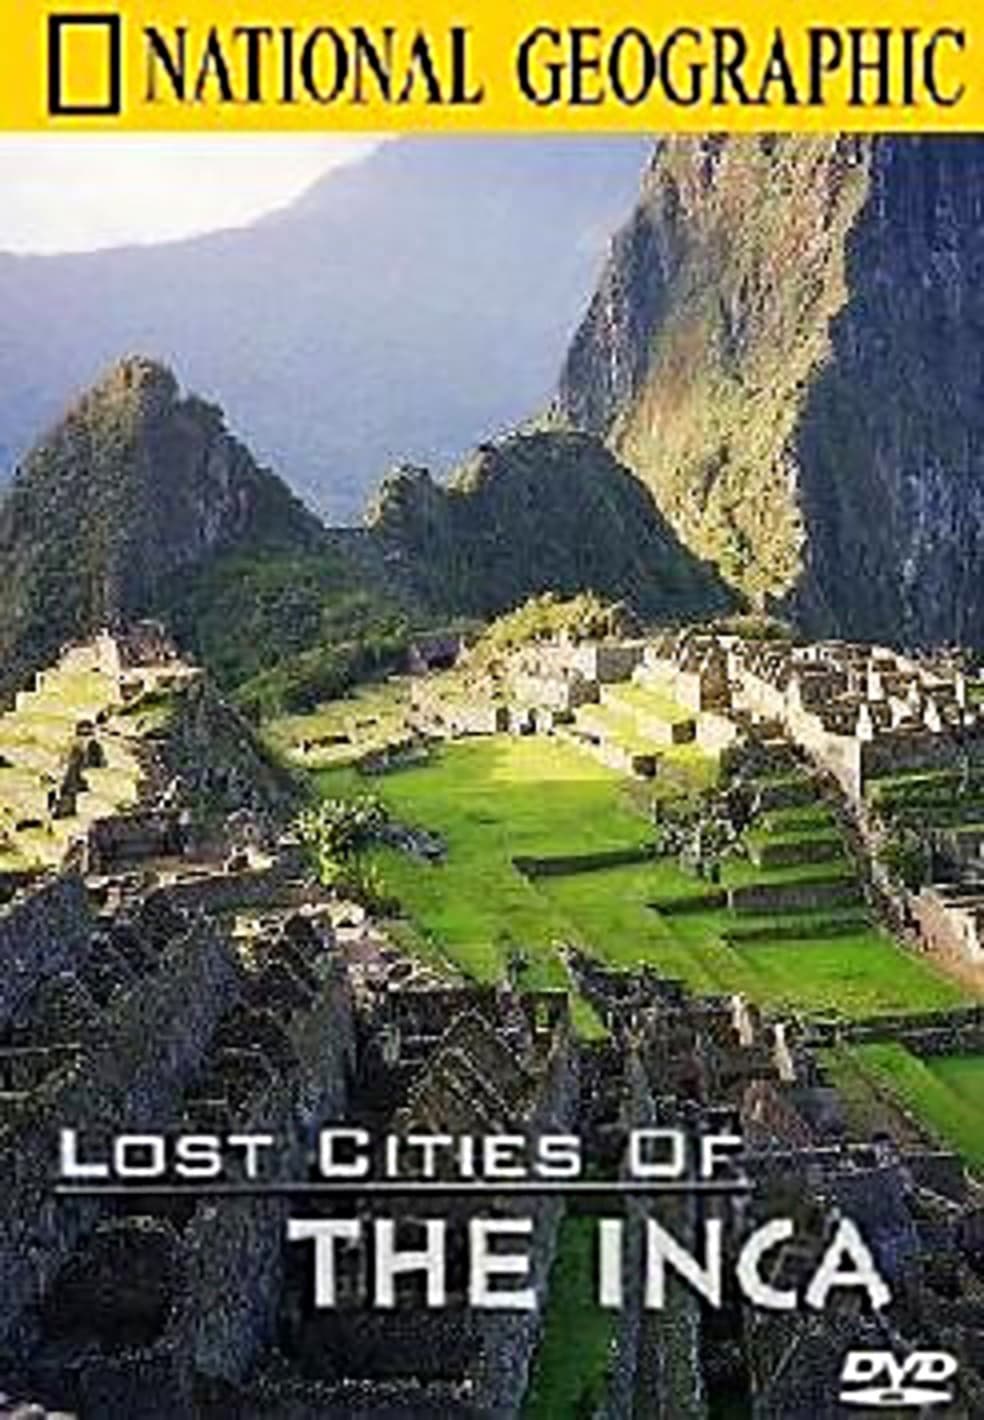 Lost Cities of the Inca